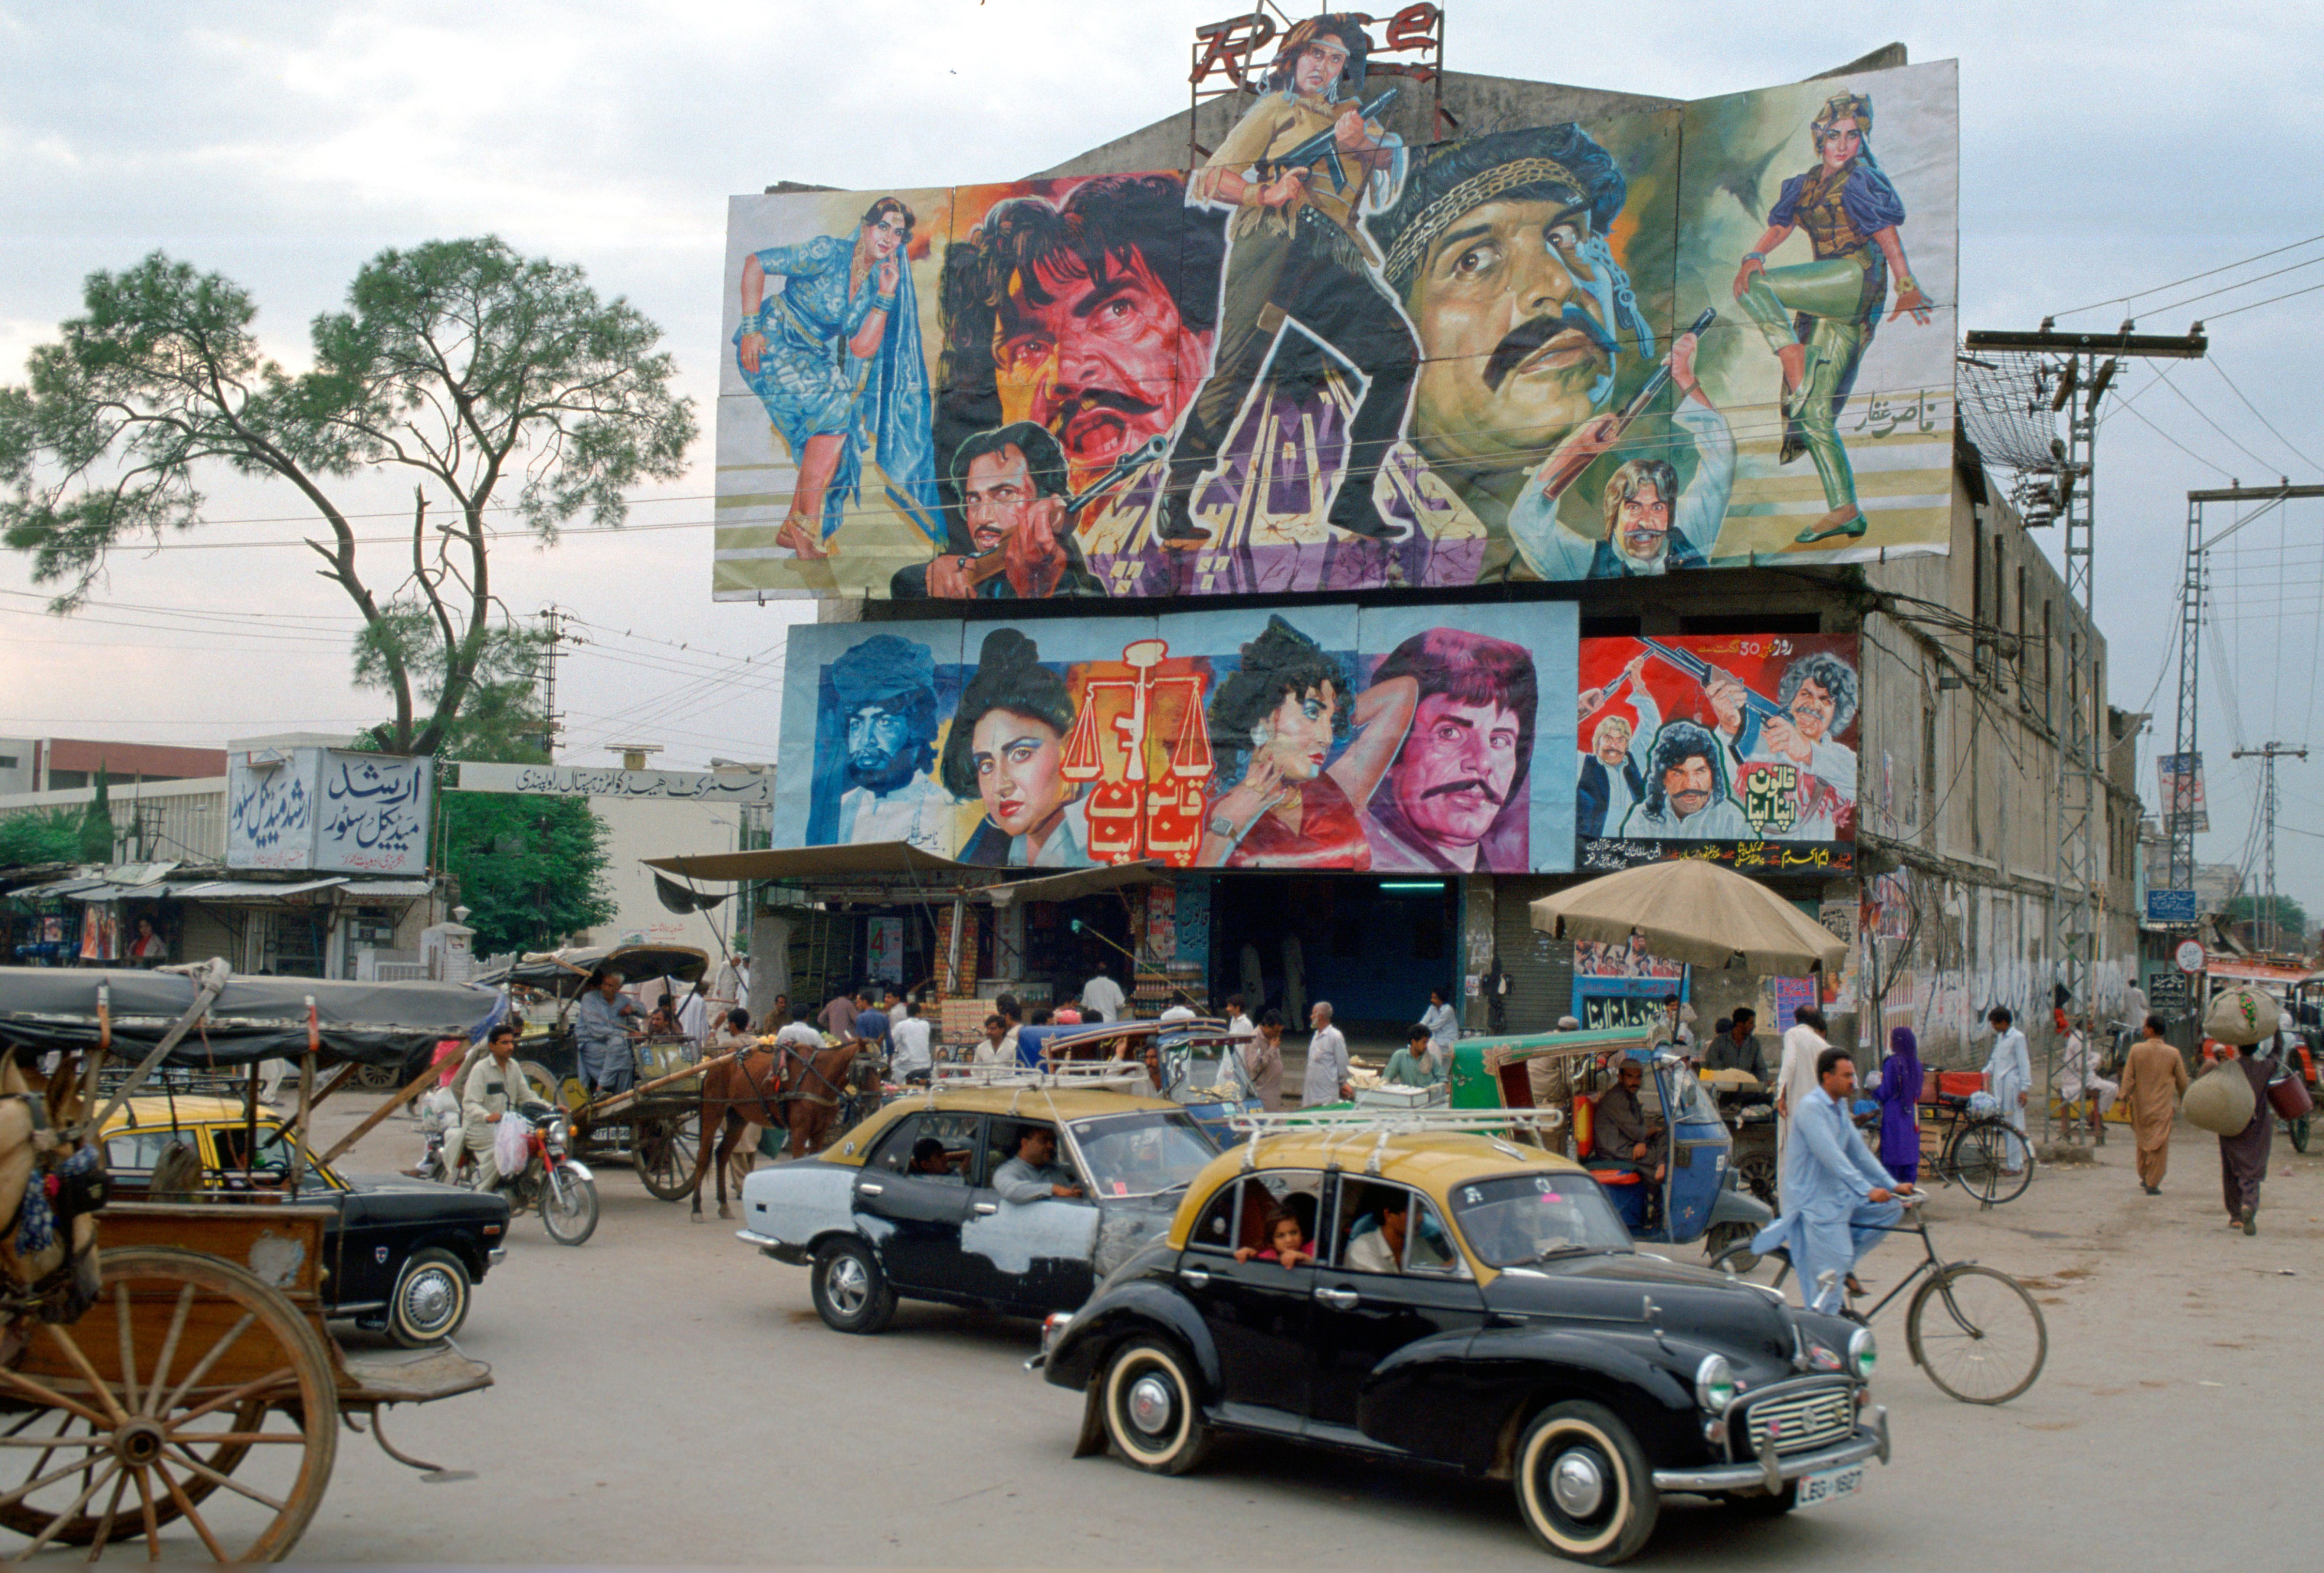 Street scene in Islamabad, Pakistan showing rickshaws, an old two-tone Morris Minor car and the local cinema advertising films often described as 